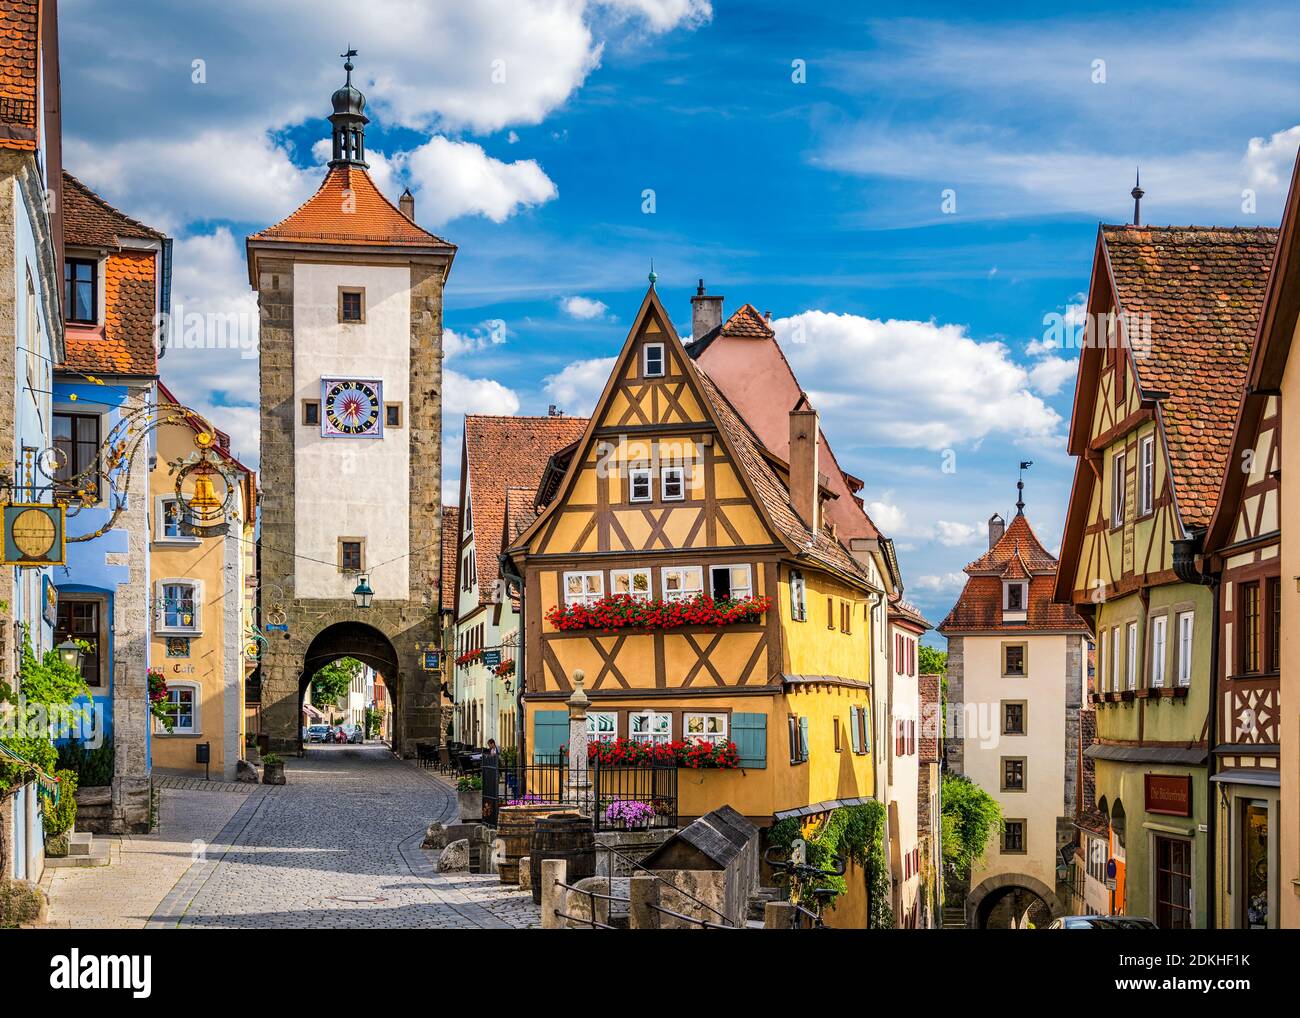 Medieval town of Rothenburg ob der Tauber, Germany Stock Photo